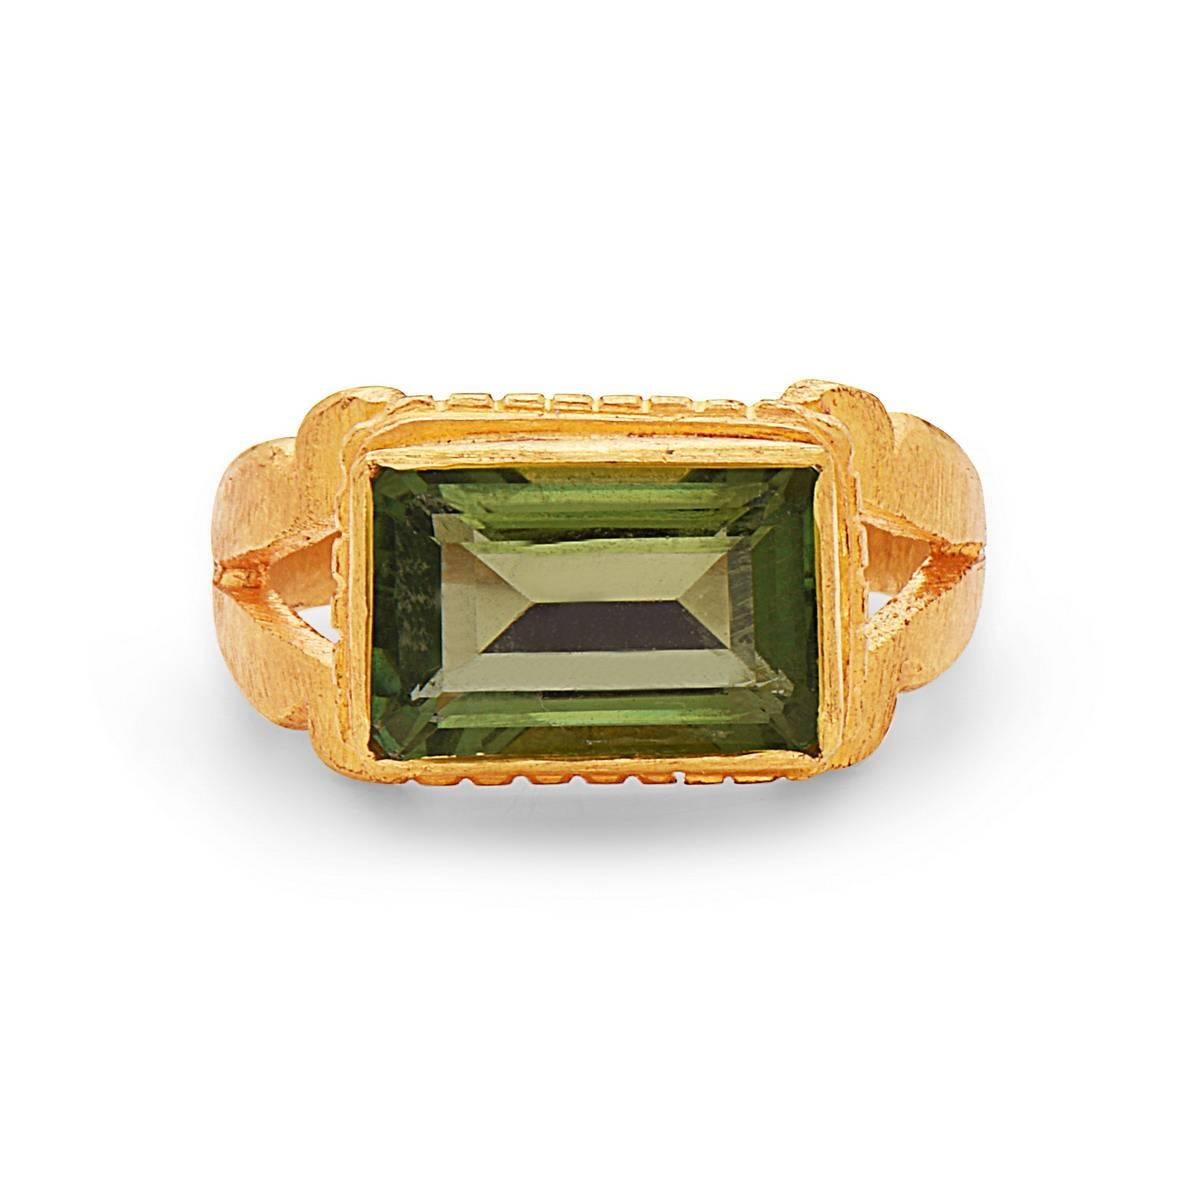 Eternal looking Green Tourmaline Ring in 22K Gold handcrafted by our finest artisans is a beautiful piece to own.

Ring Size: 7.5 ( can be sized )

22kt: 8.59gm
Green Tourmaline: 5.10cts 